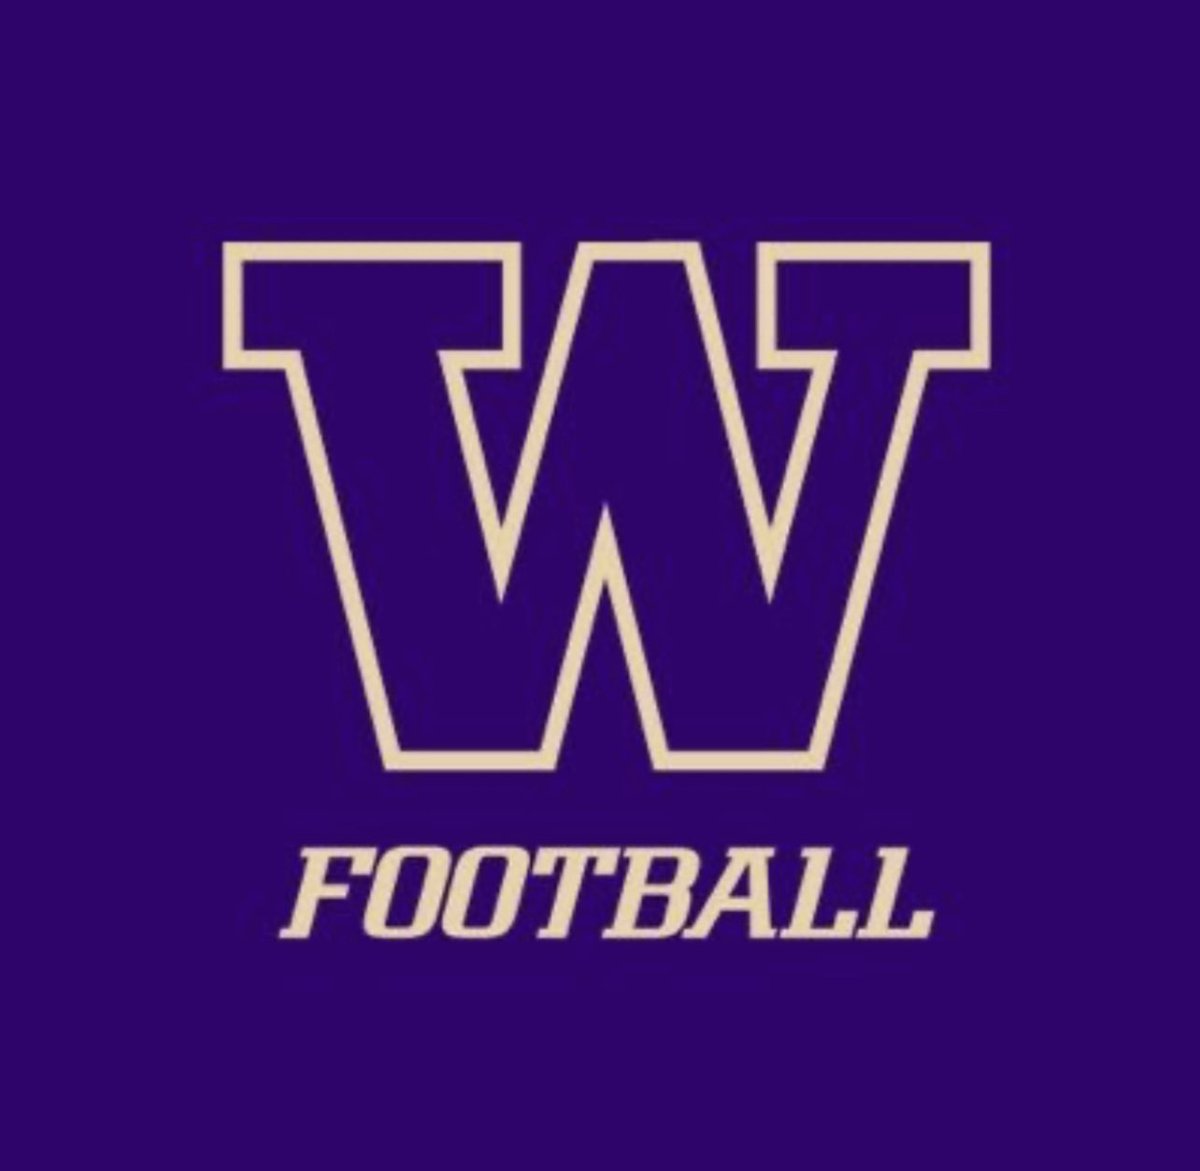 After a great conversation with @CoachLakeUDUB and @CoachCato1 I am blessed to receive an offer from the University of Washington.